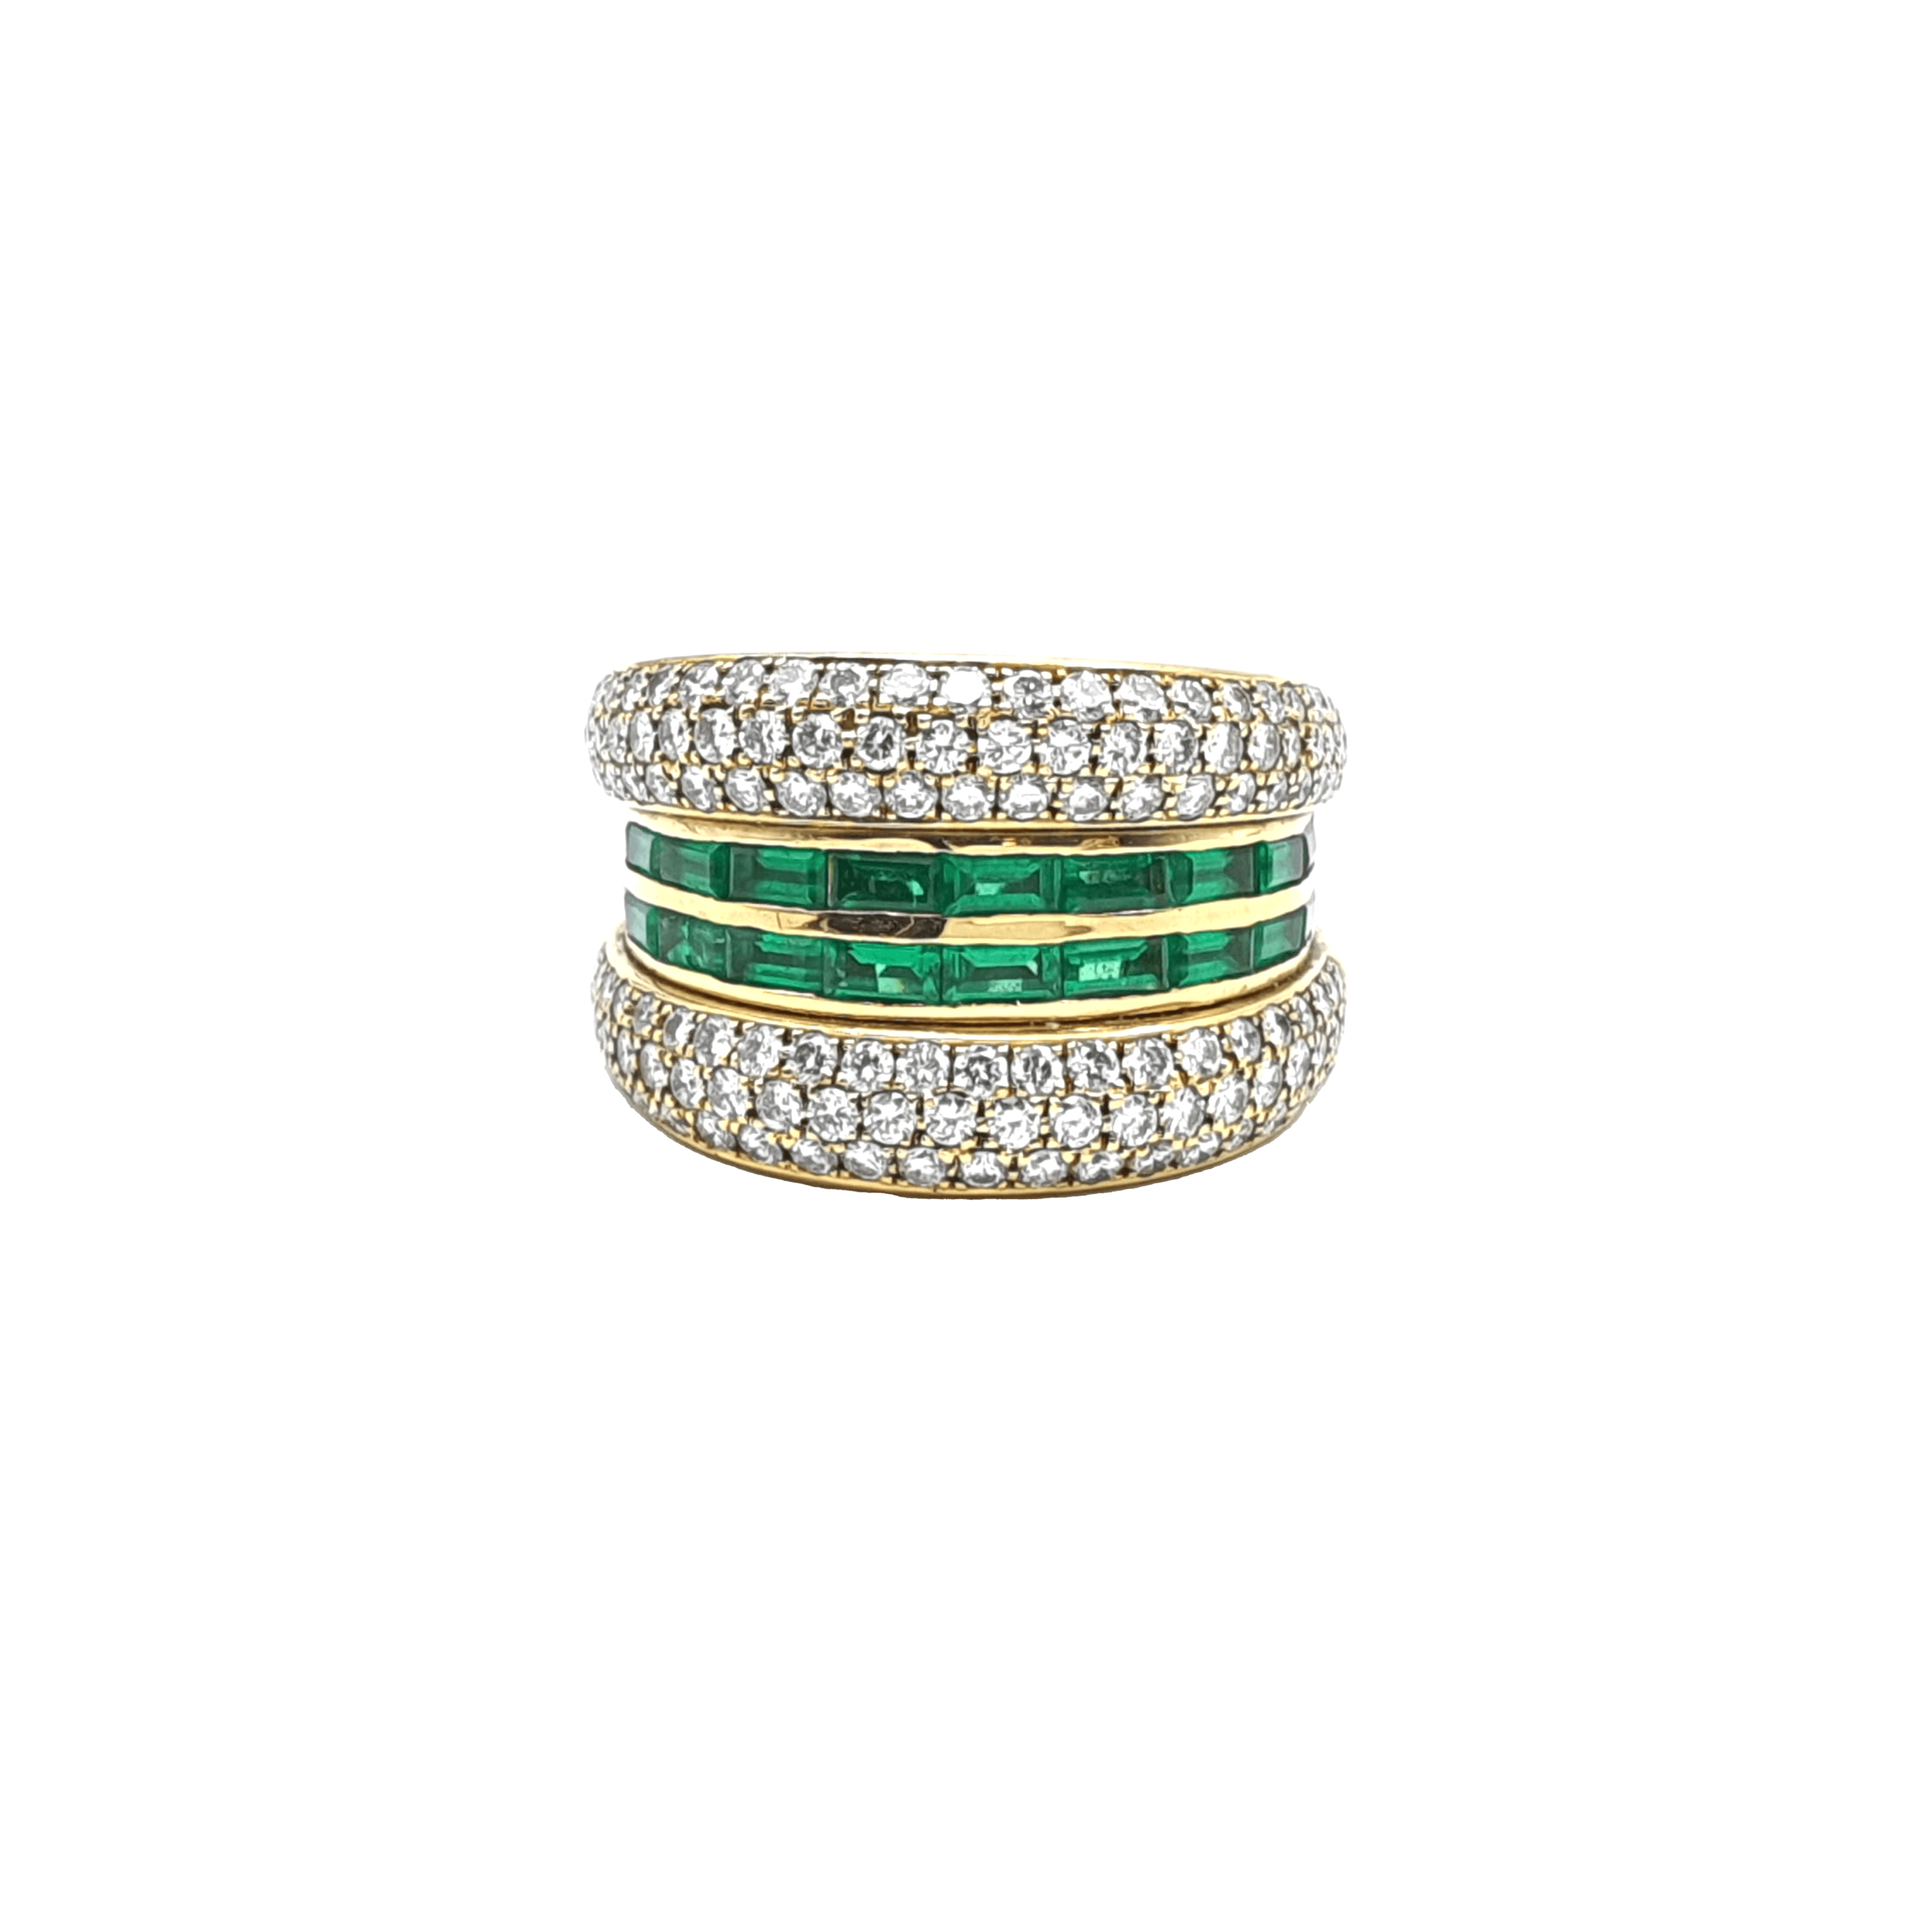 Chopard 18K Gold Diamond and Emerald Ring